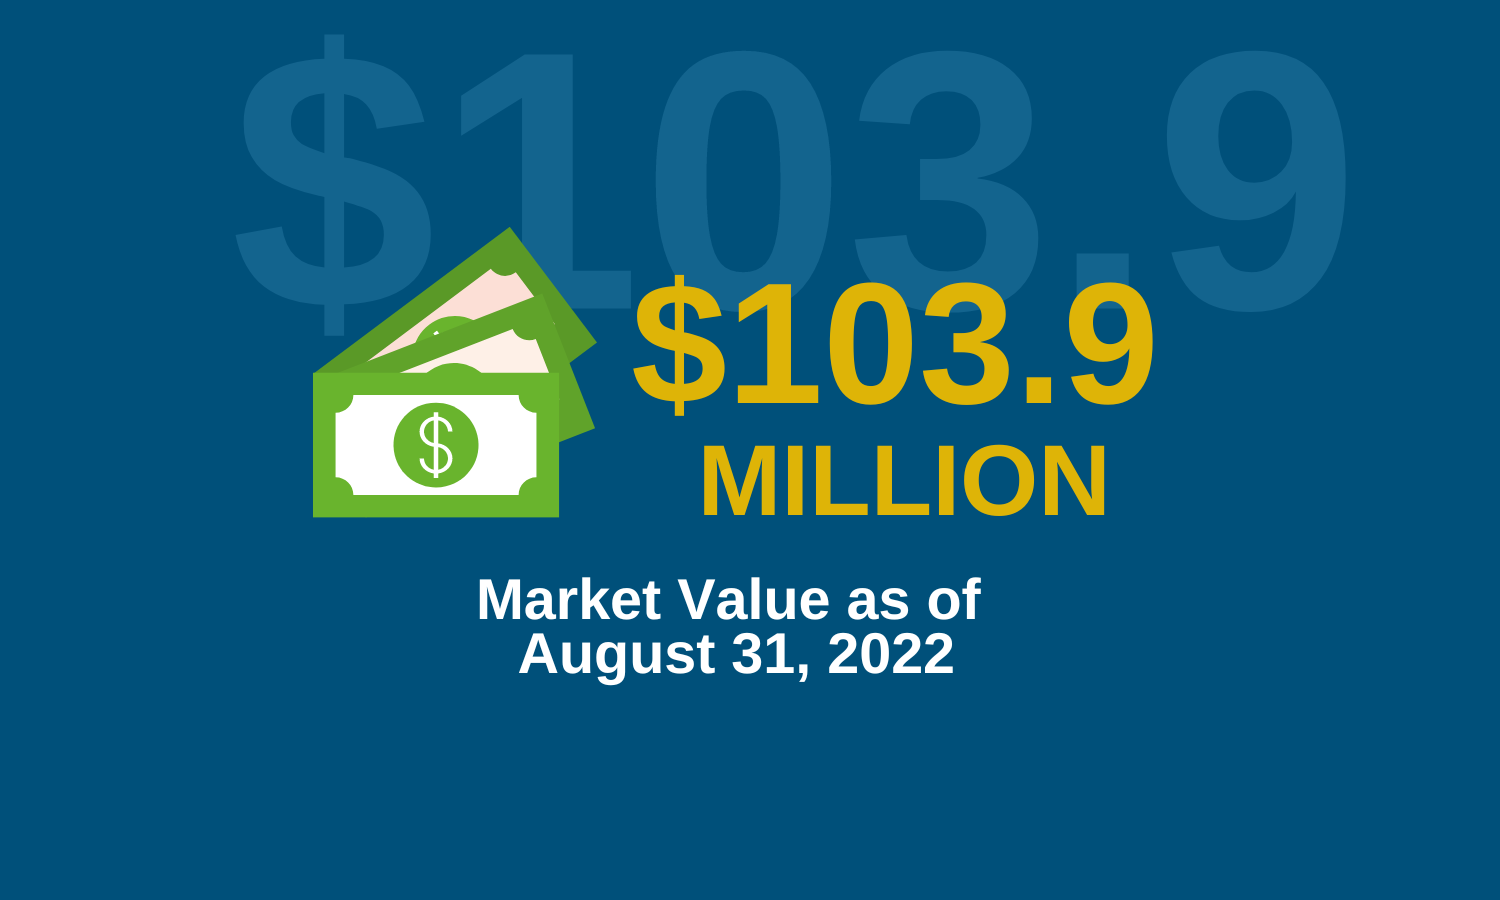 Graphic describing the market value at $103.9 million dollars as of August 31, 2022.